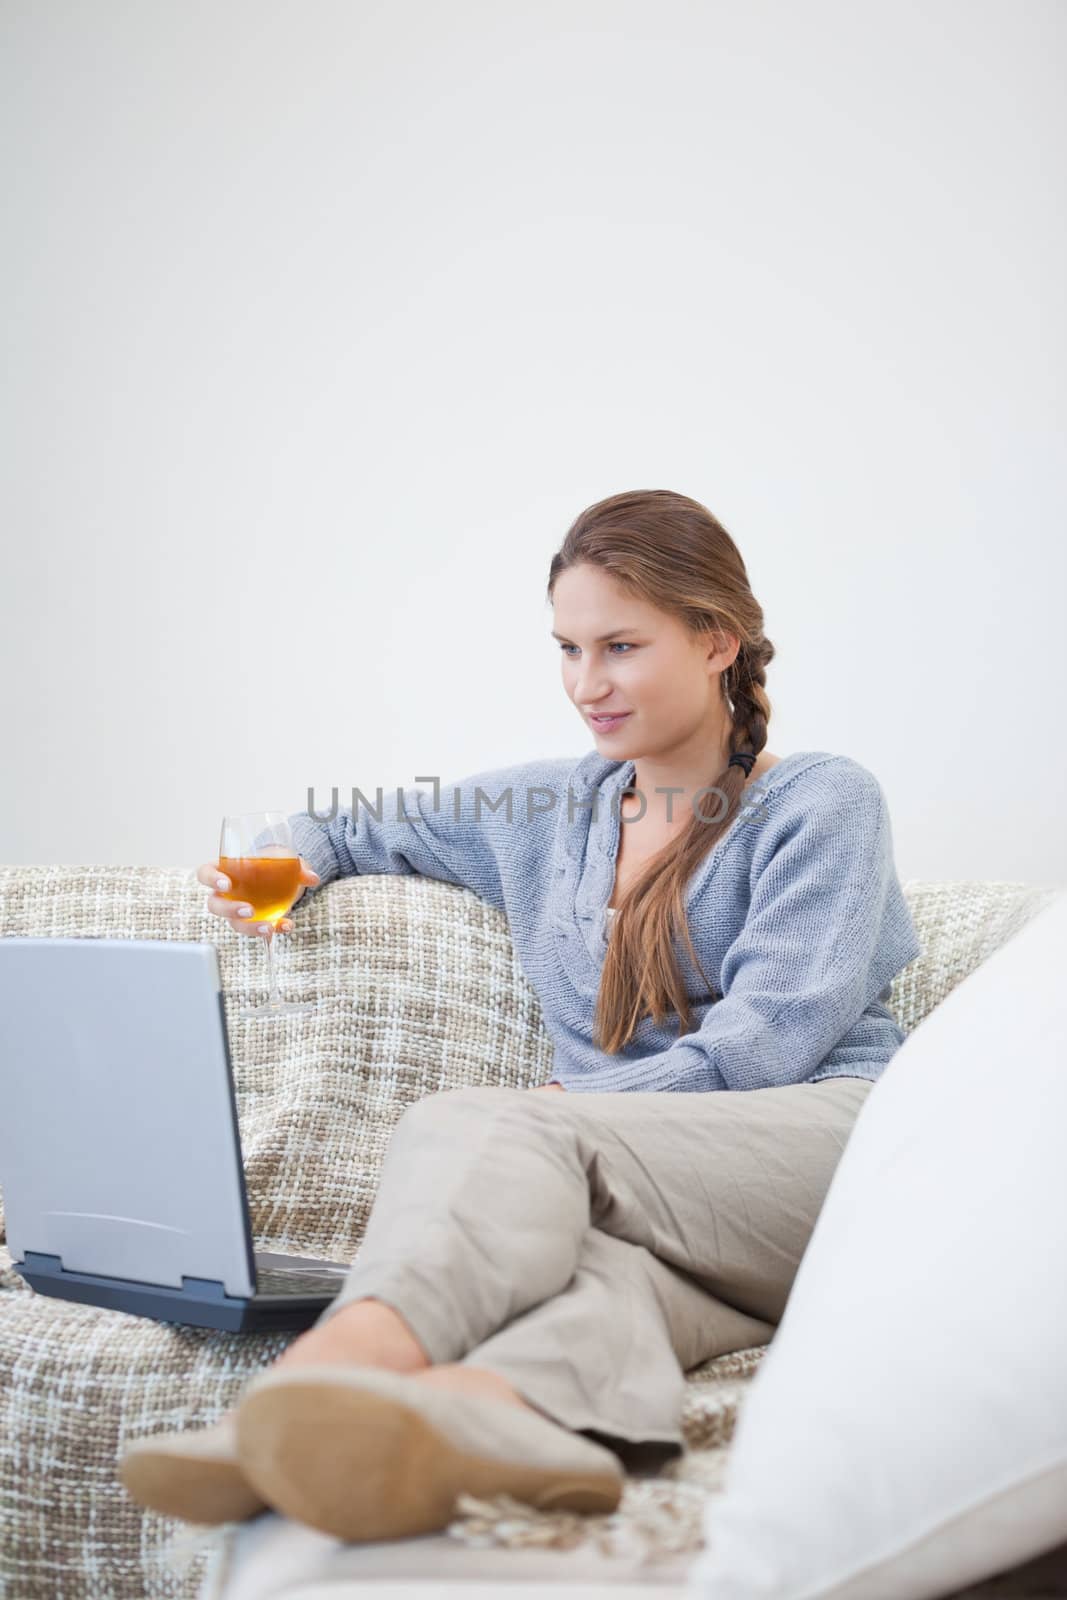 Woman sitting and holding a glass while looking on a laptop indoors